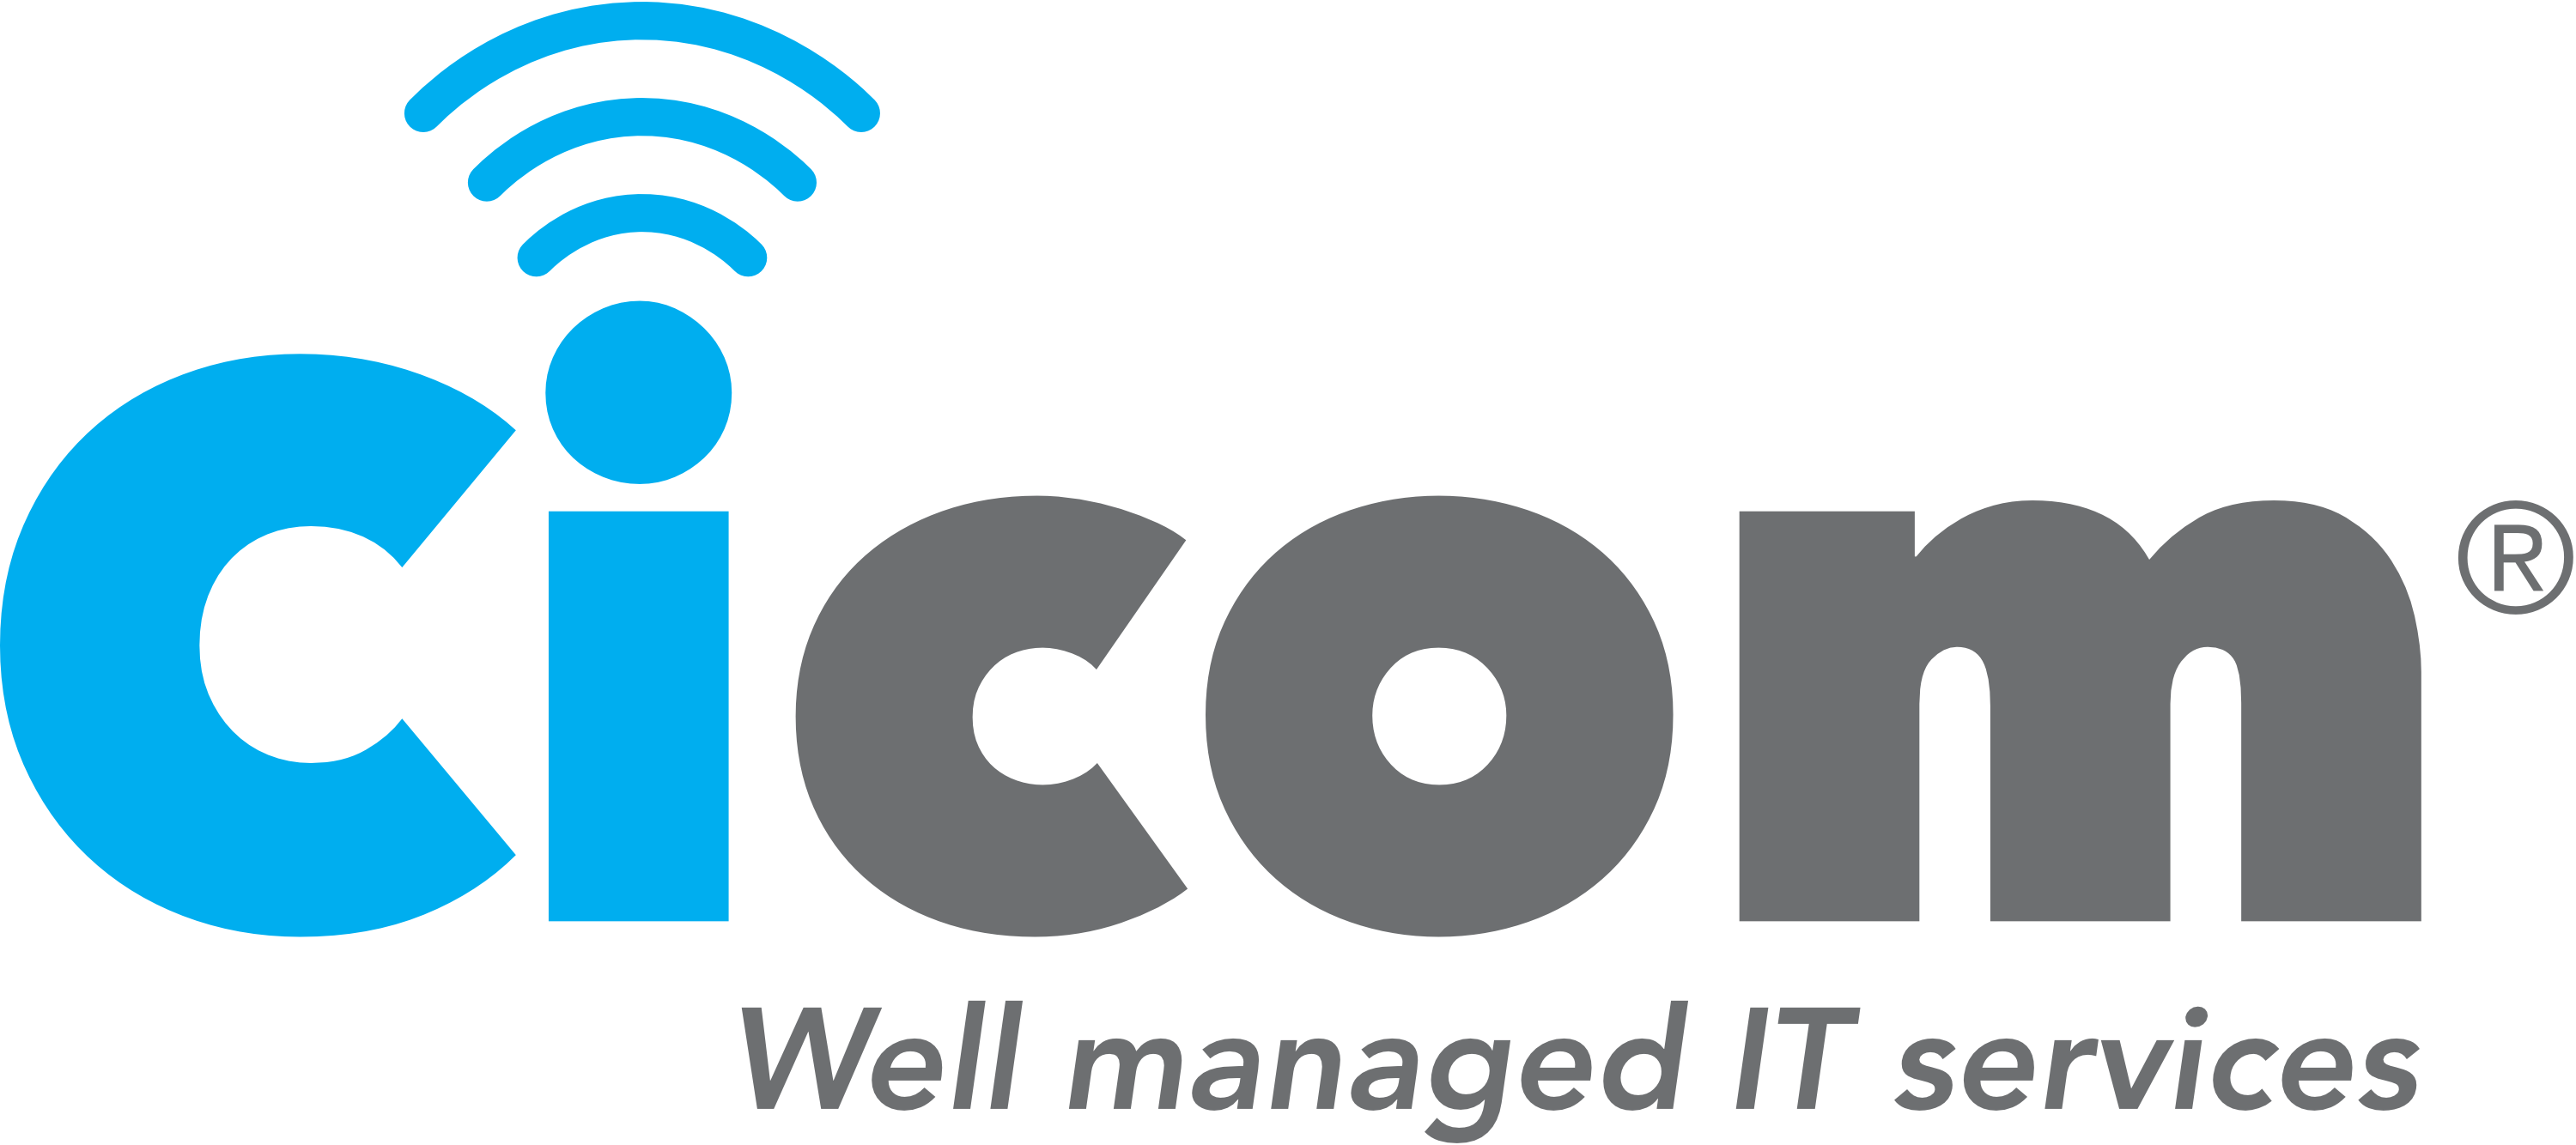 Cicom Logo CMYK with brand promise Well managed IT services Hi Res